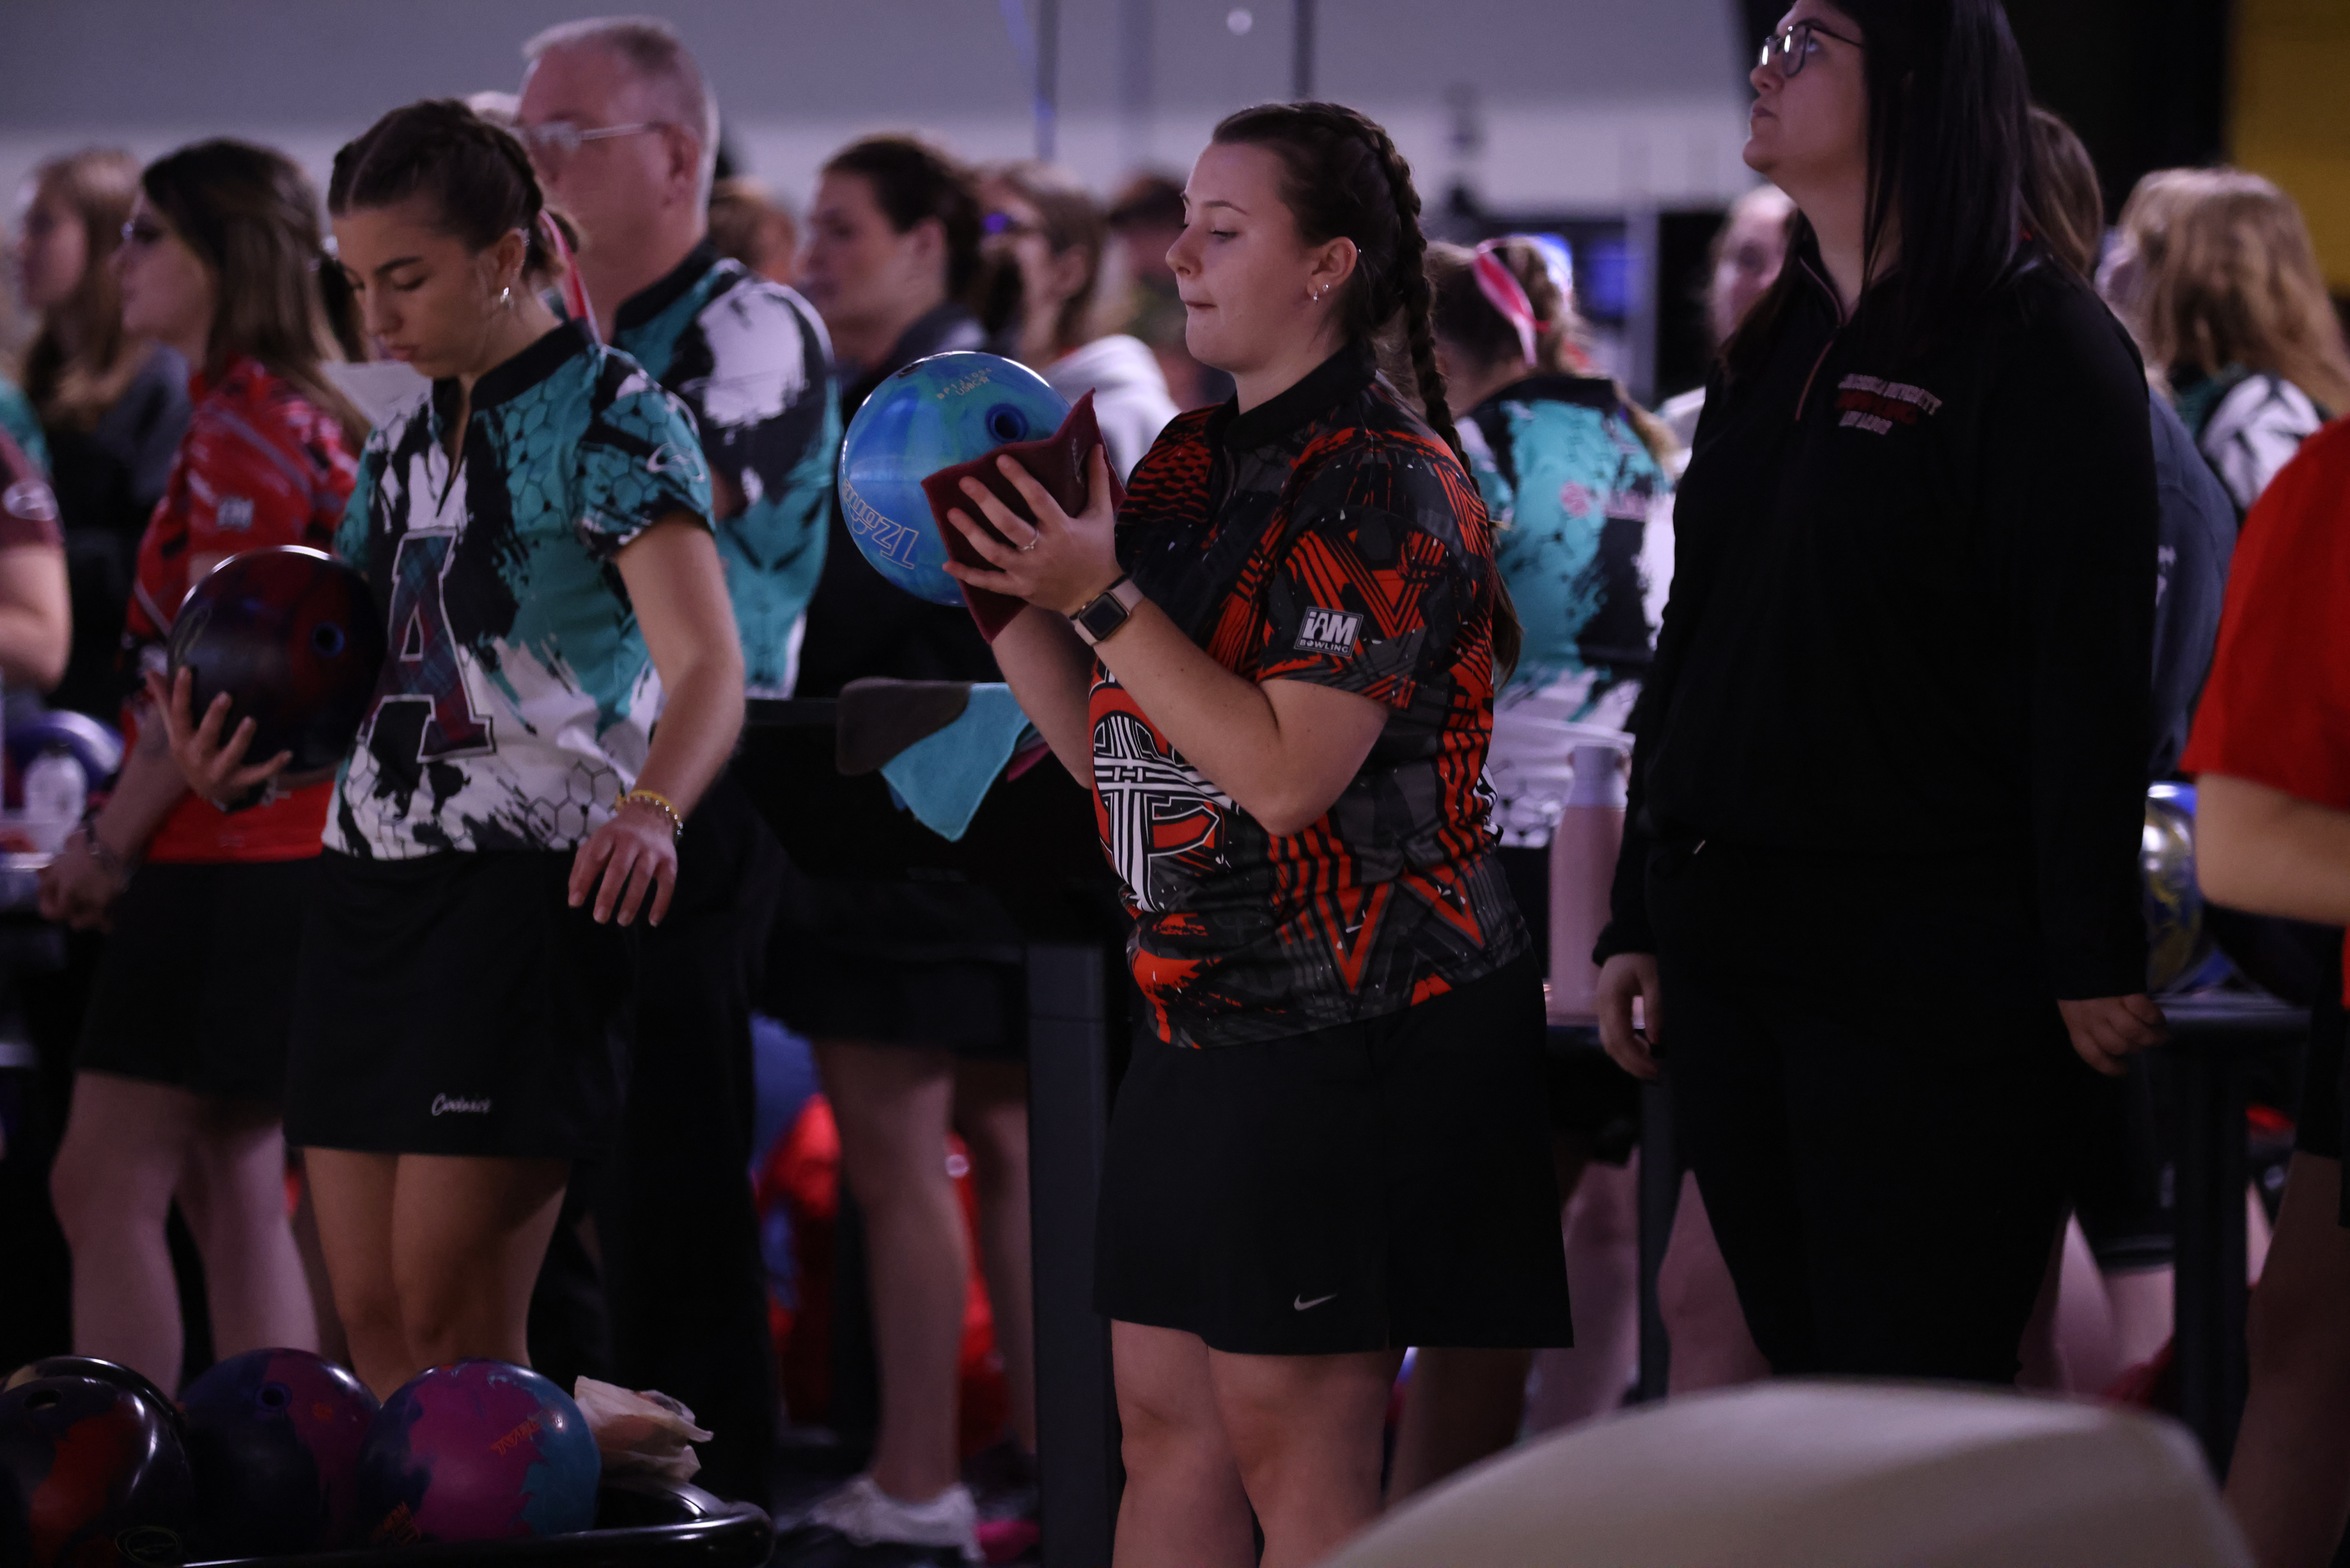 Women's Bowling finishes in 11th place at the Glenn Carlson Invitational